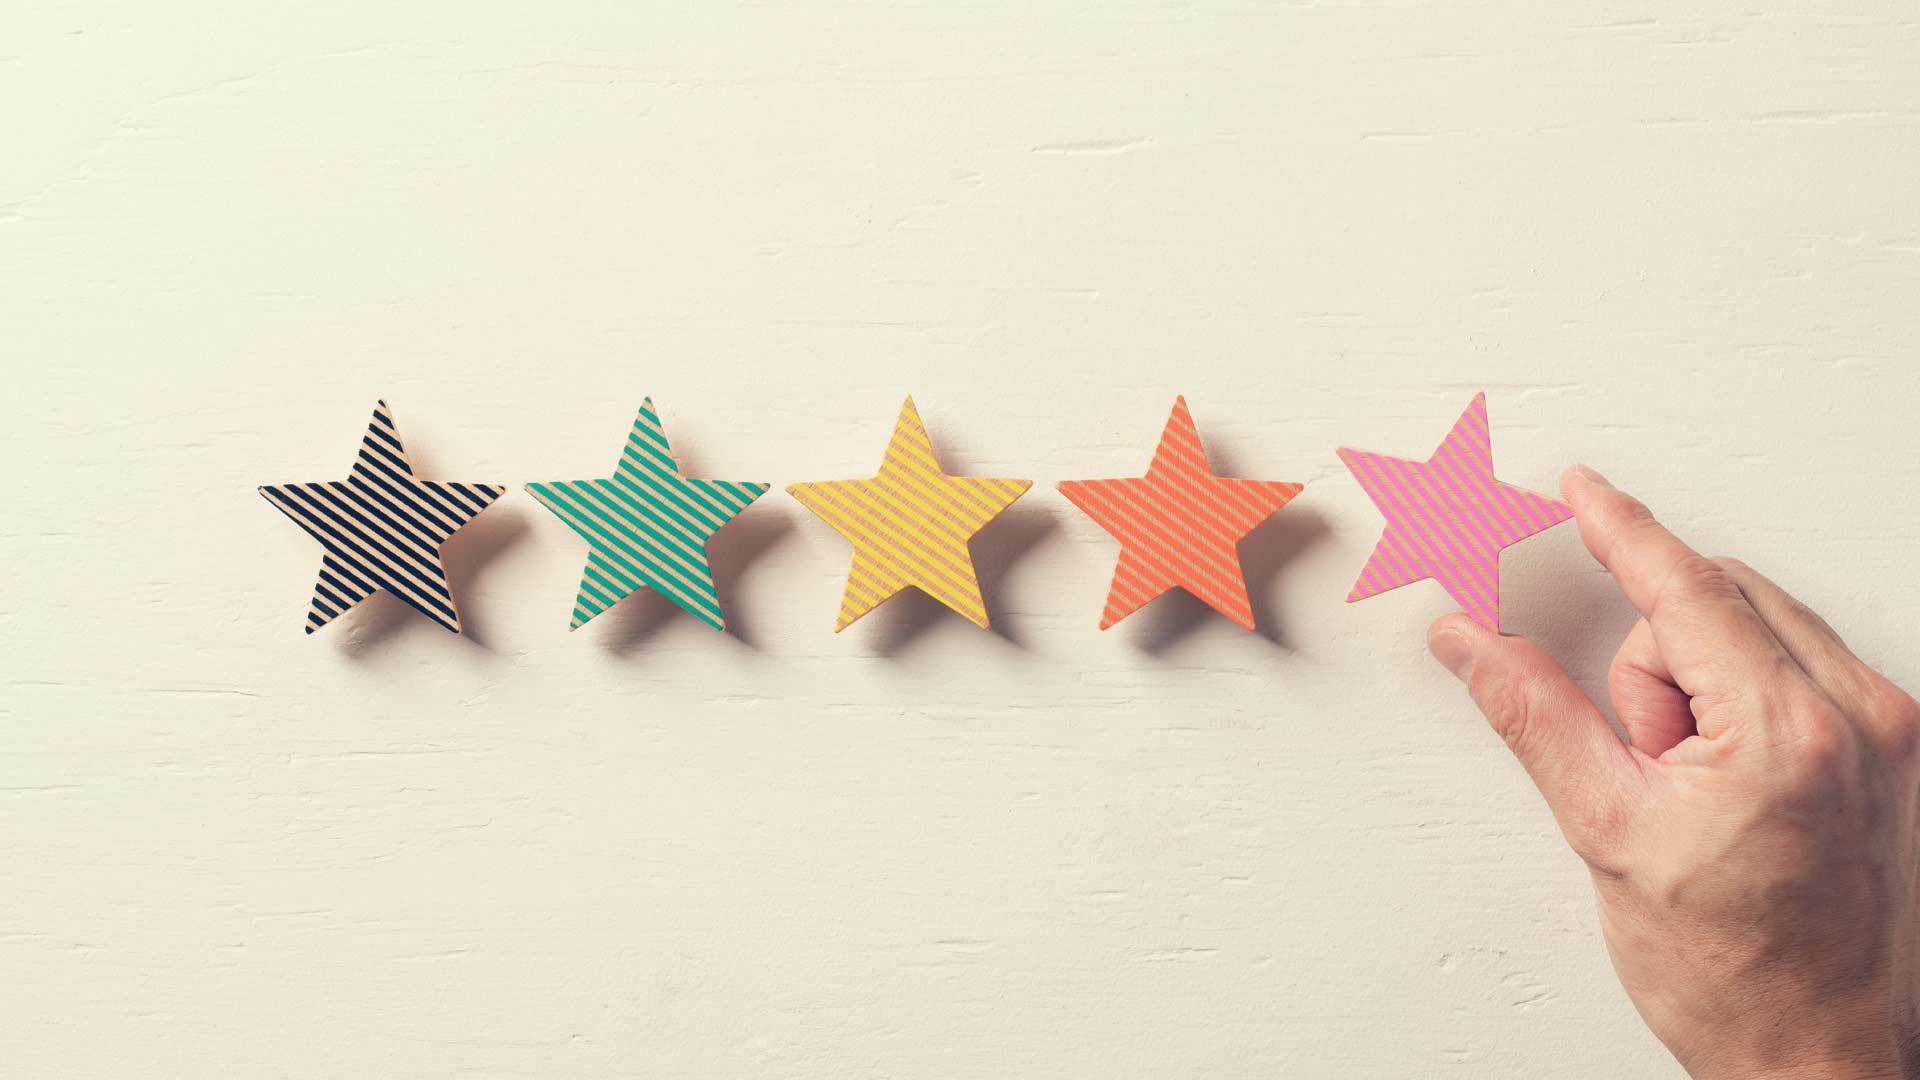 A hand placing a star next to four other stars in a row.